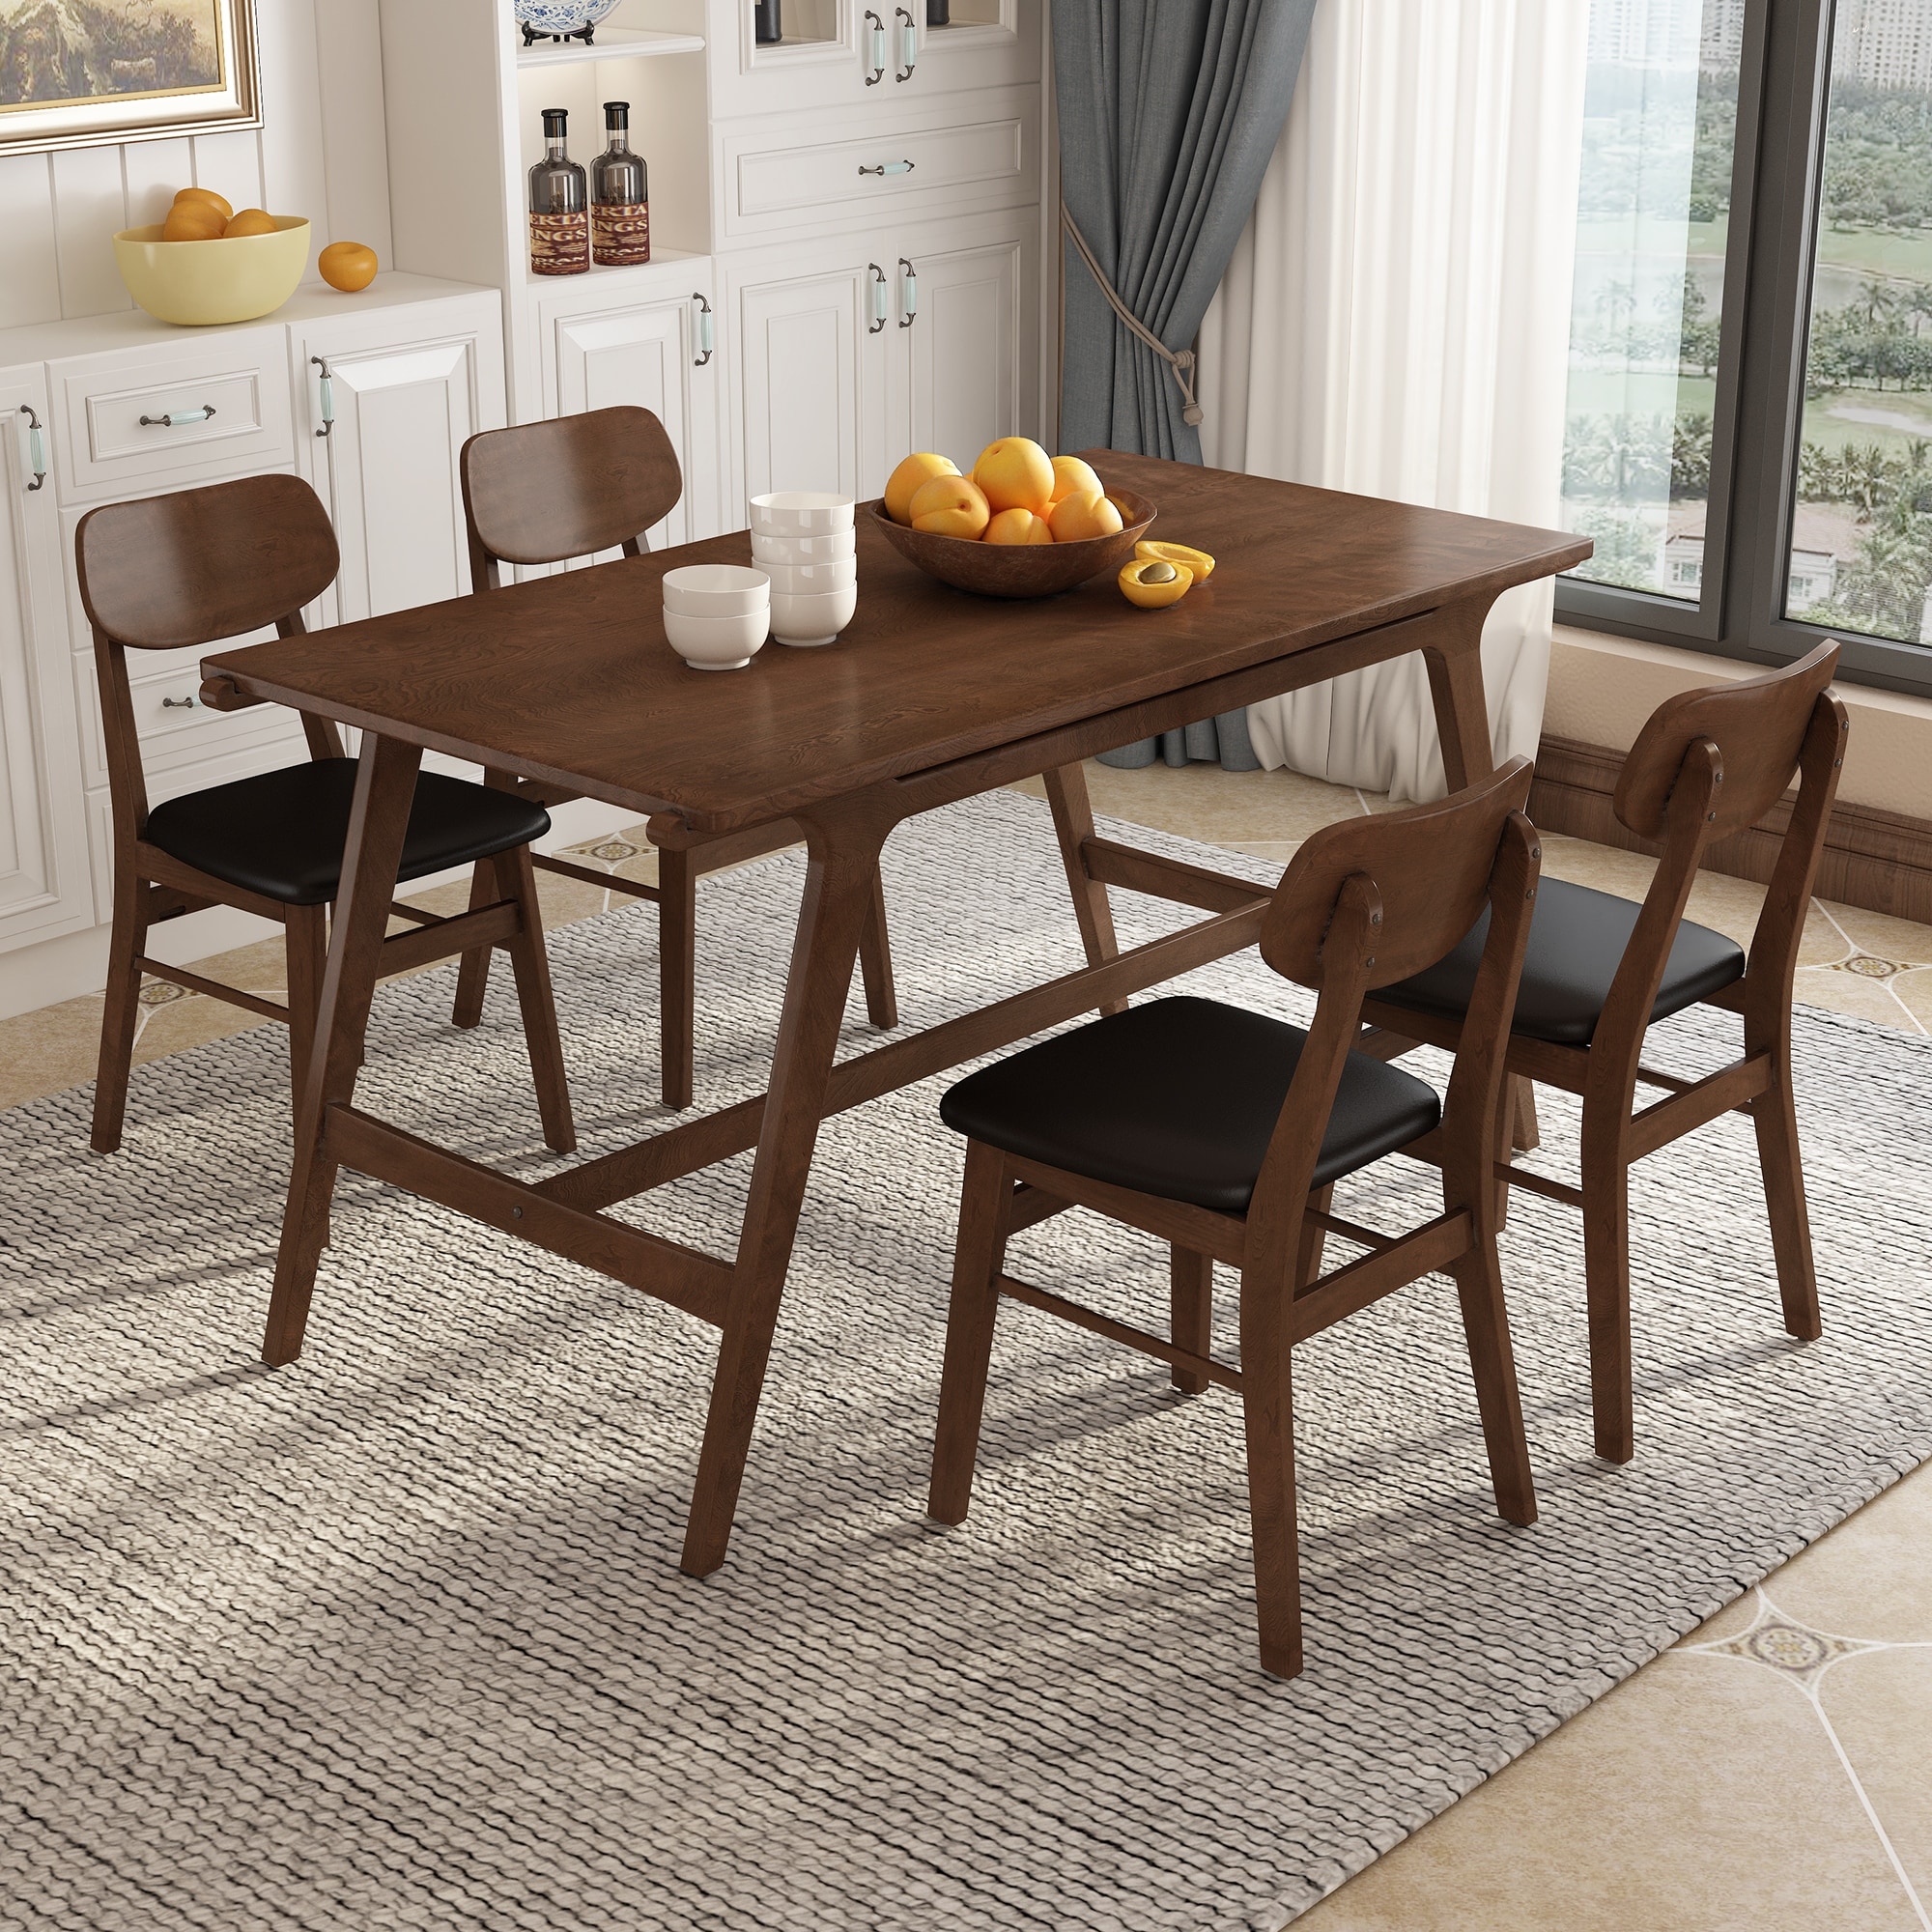 https://ak1.ostkcdn.com/images/products/is/images/direct/bbff19c8ff7f17c877c44826982addd655884bca/Contemporary-5-Piece-Dining-Set%2C-Kitchen-Dining-Table-with-4-Faux-Leather-Dining-Chairs-Comfortable-and-Simple.jpg